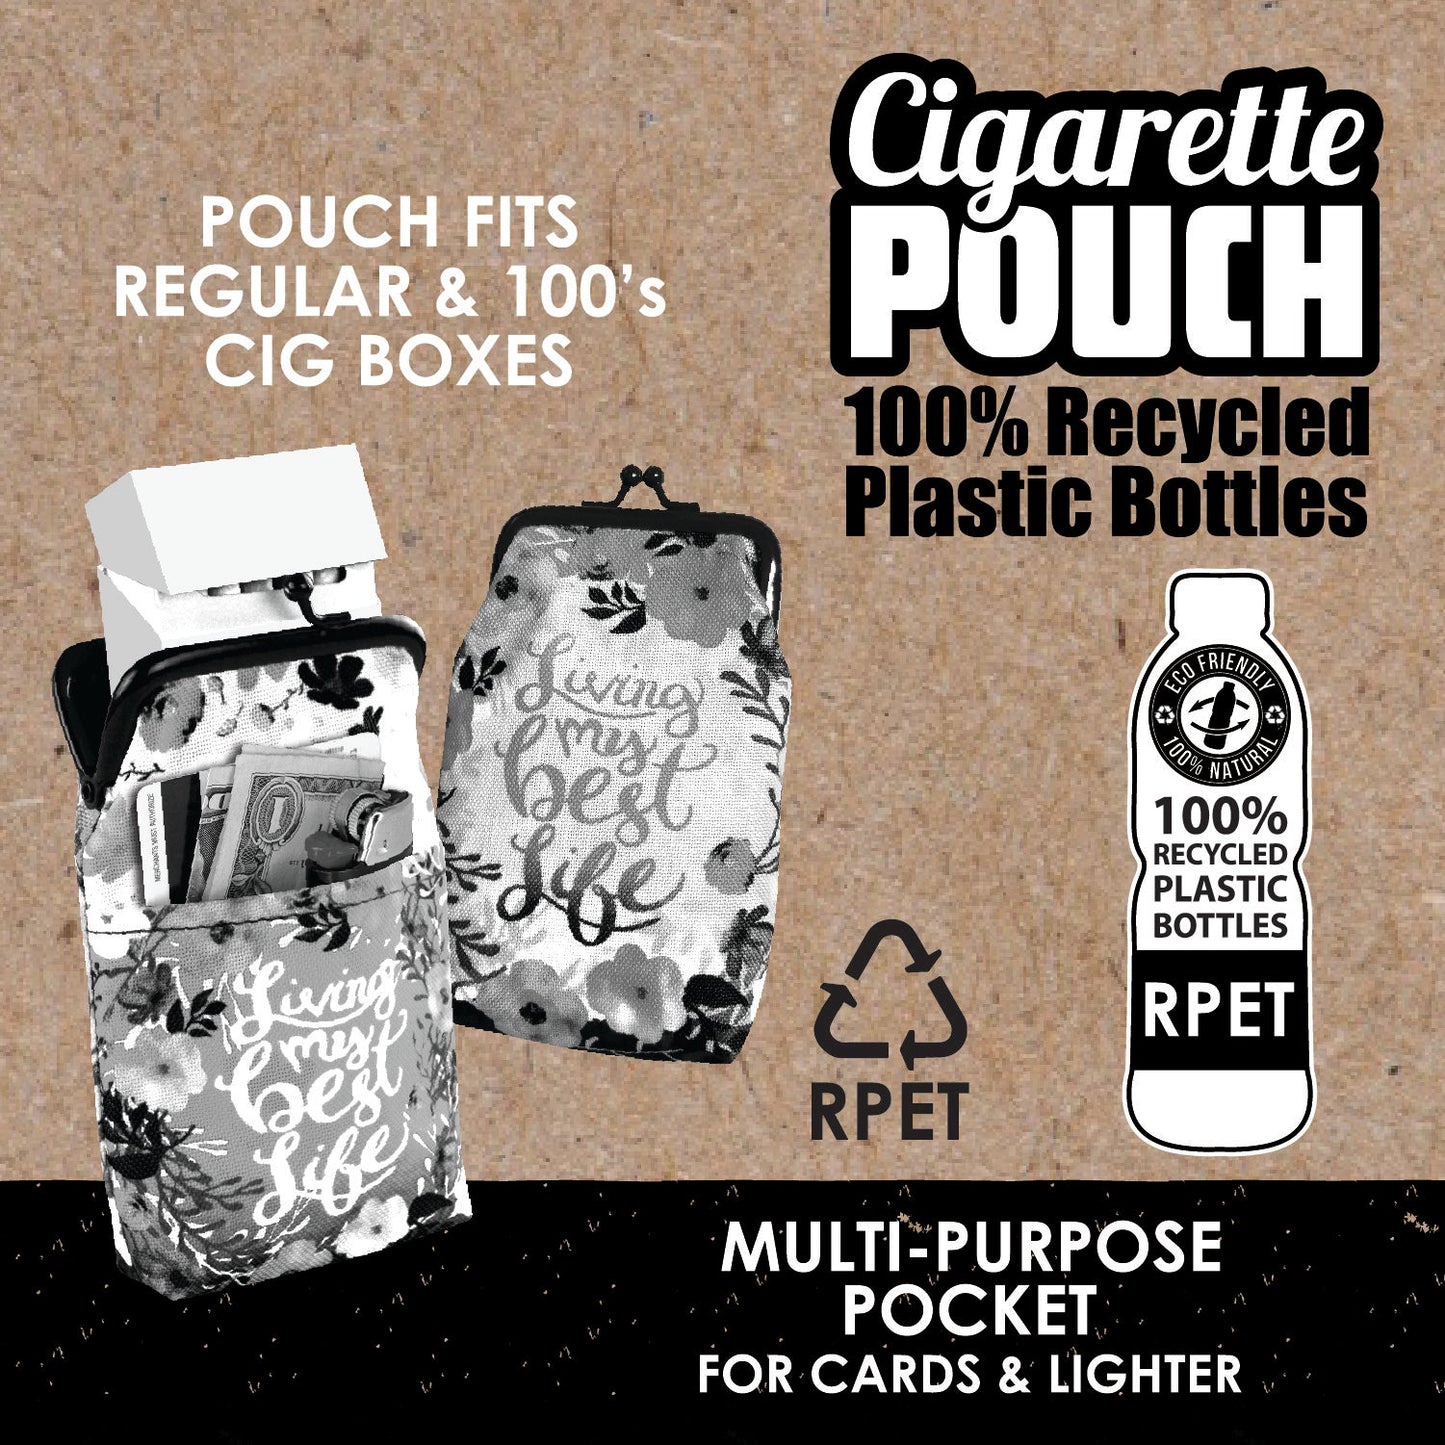 ITEM NUMBER 026634 RPET CIG POUCH WALLET 8 PIECES PER DISPLAY